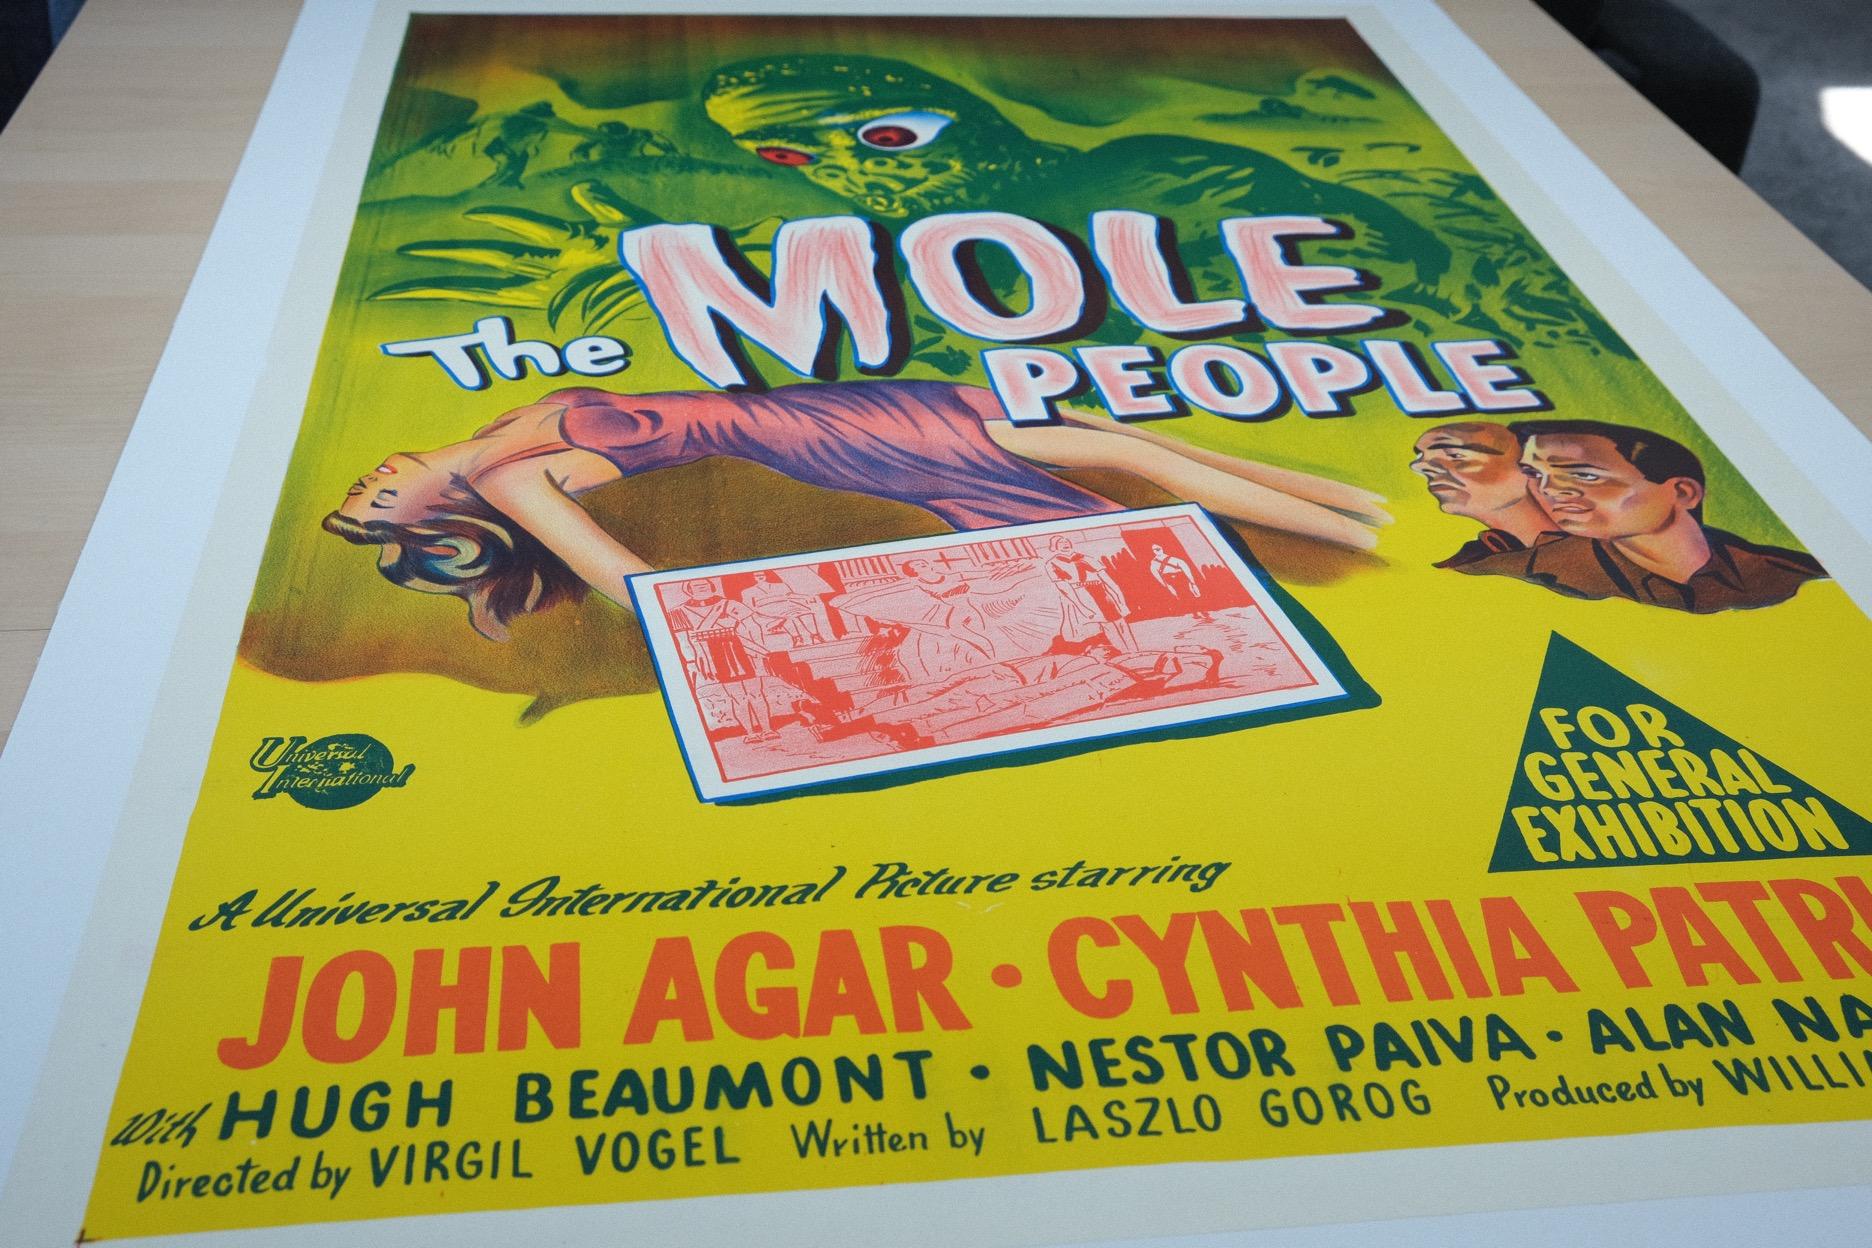 Size: One-Sheet

Condition: Mint

Dimensions: 1150mm x 780mm (inc. Linen Border)

Type: Original Lithographic Print - Linen Backed

Year: 1956

Details: A very rare original poster for the classic 1956 Sci-Fi film ‘The Mole People’. This